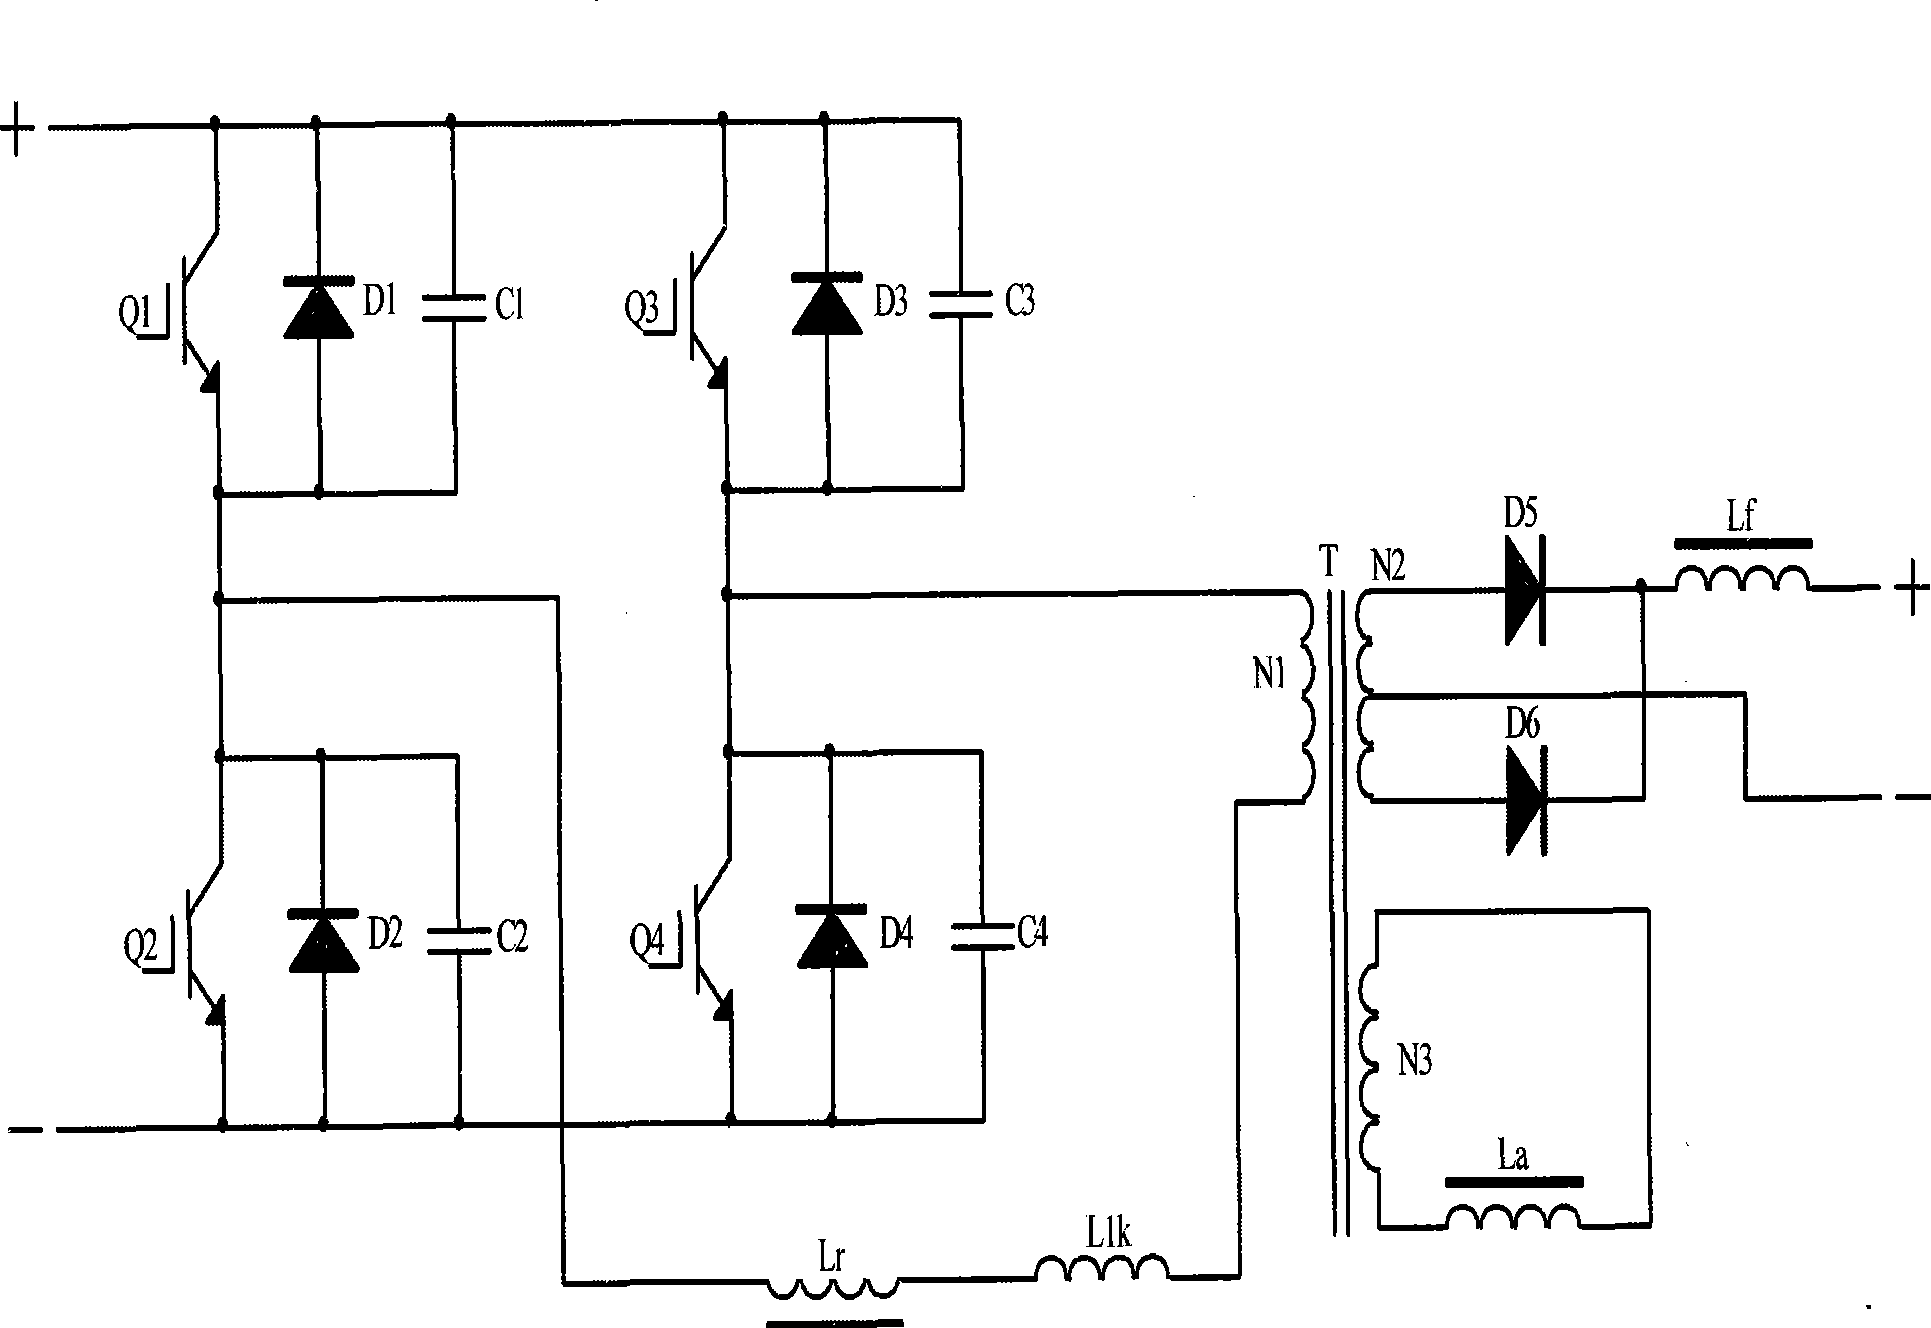 Zero-voltage soft switch topological main circuit of arc welding inverter